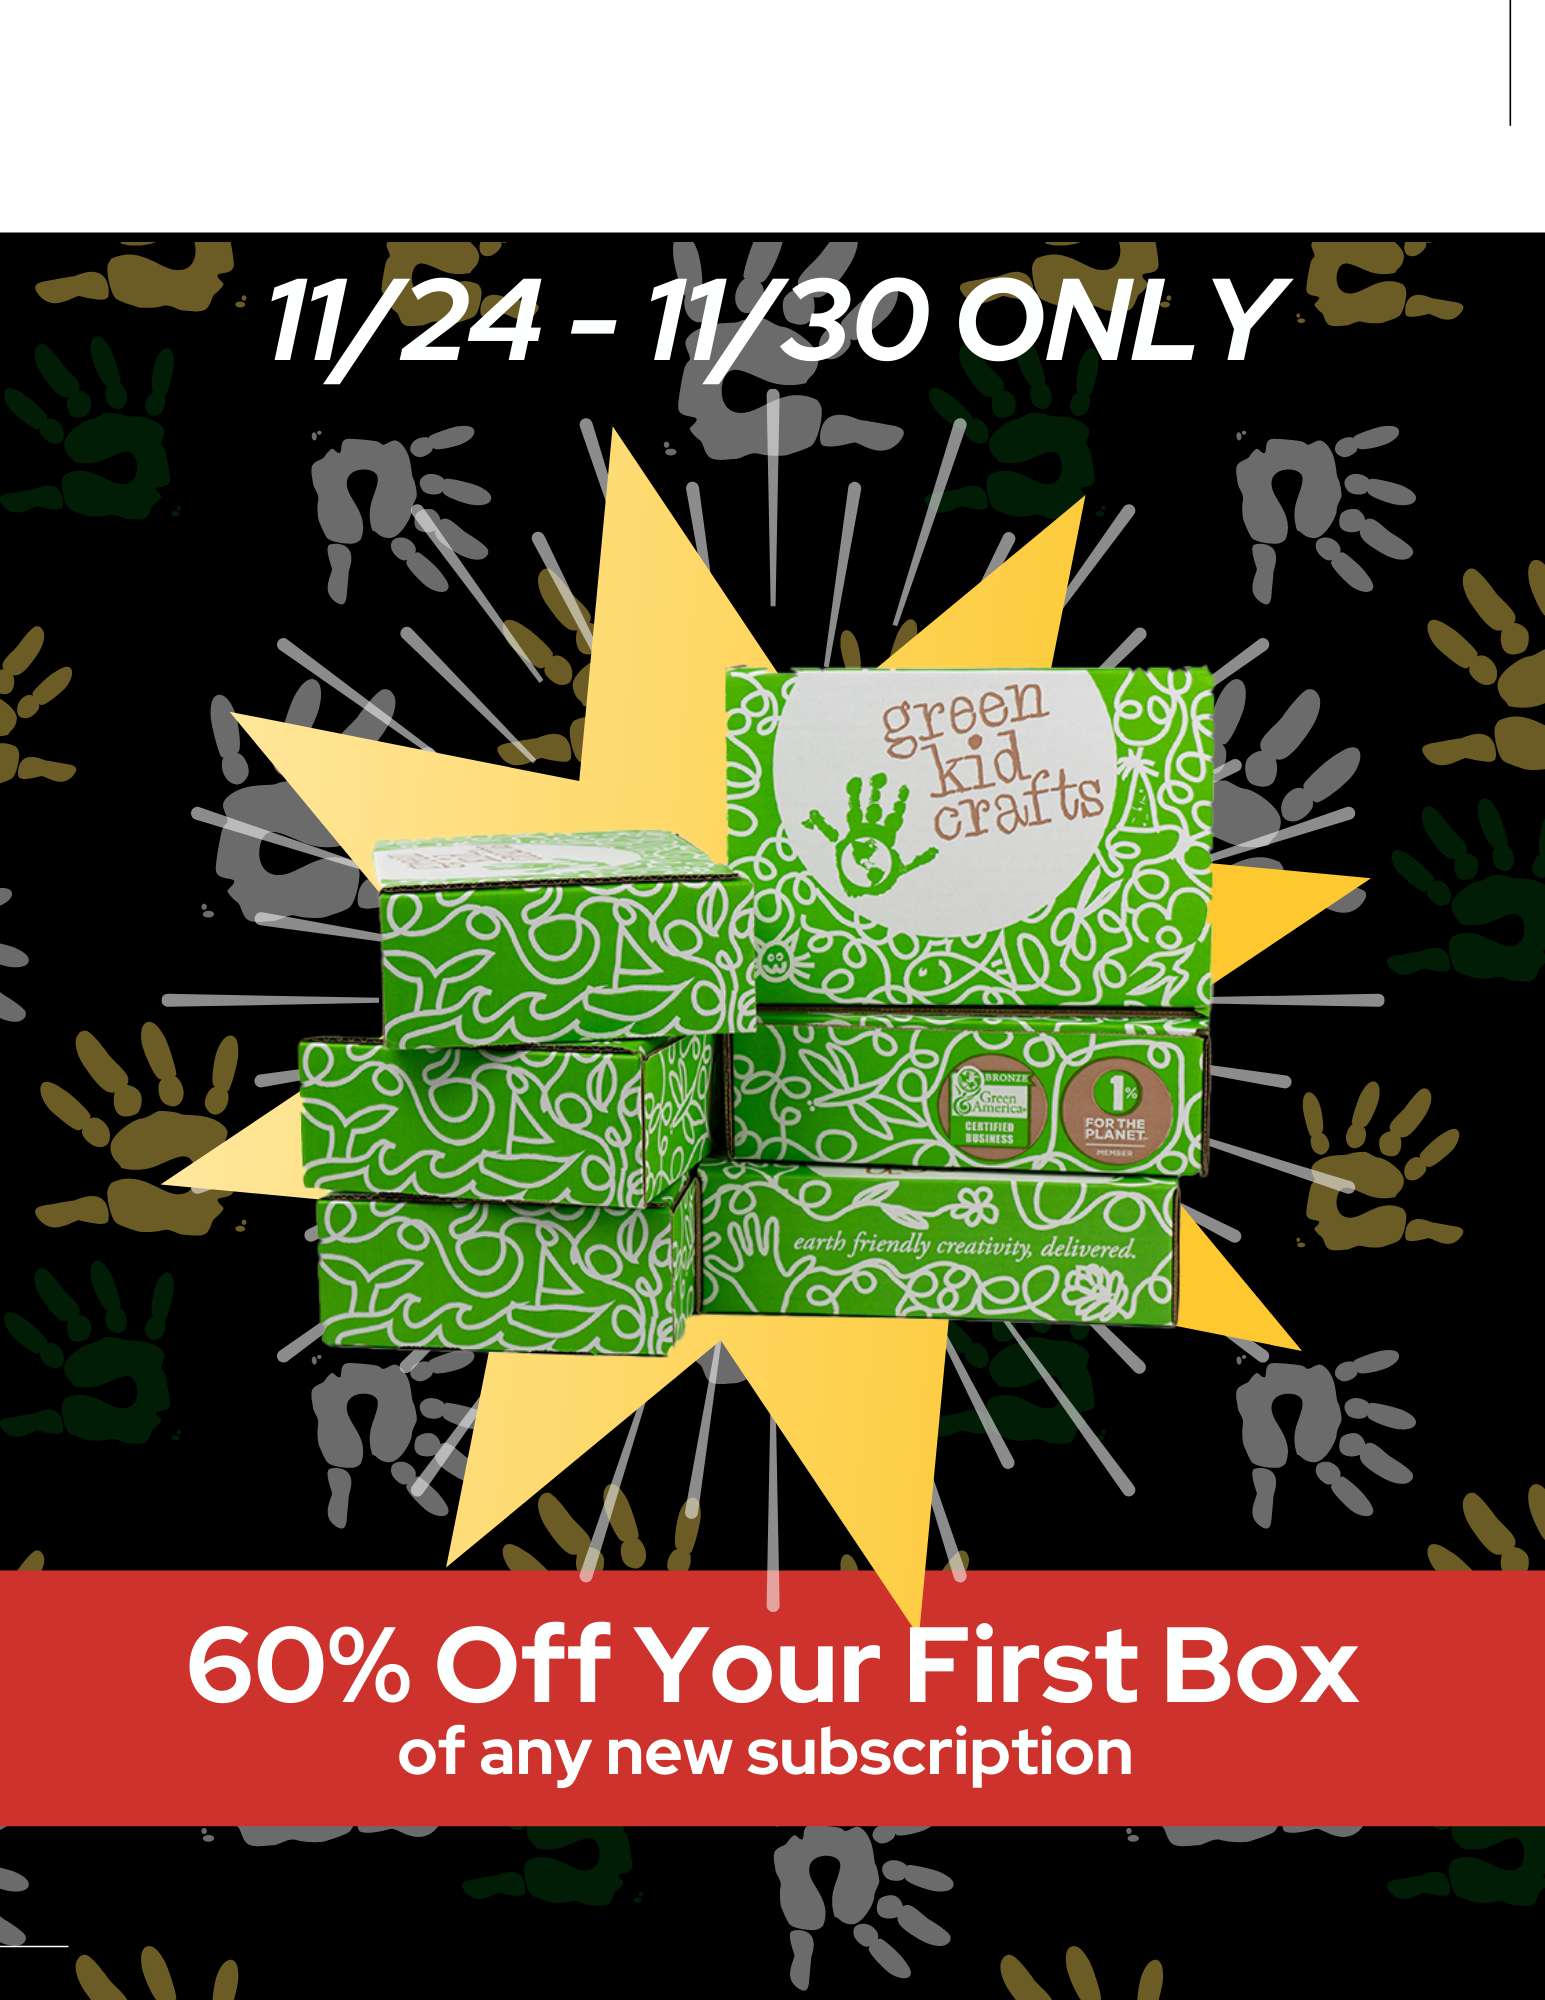 Green Kid Crafts 2021 Black Friday Deal: 60% Off The First Box Of Any New Subscription!